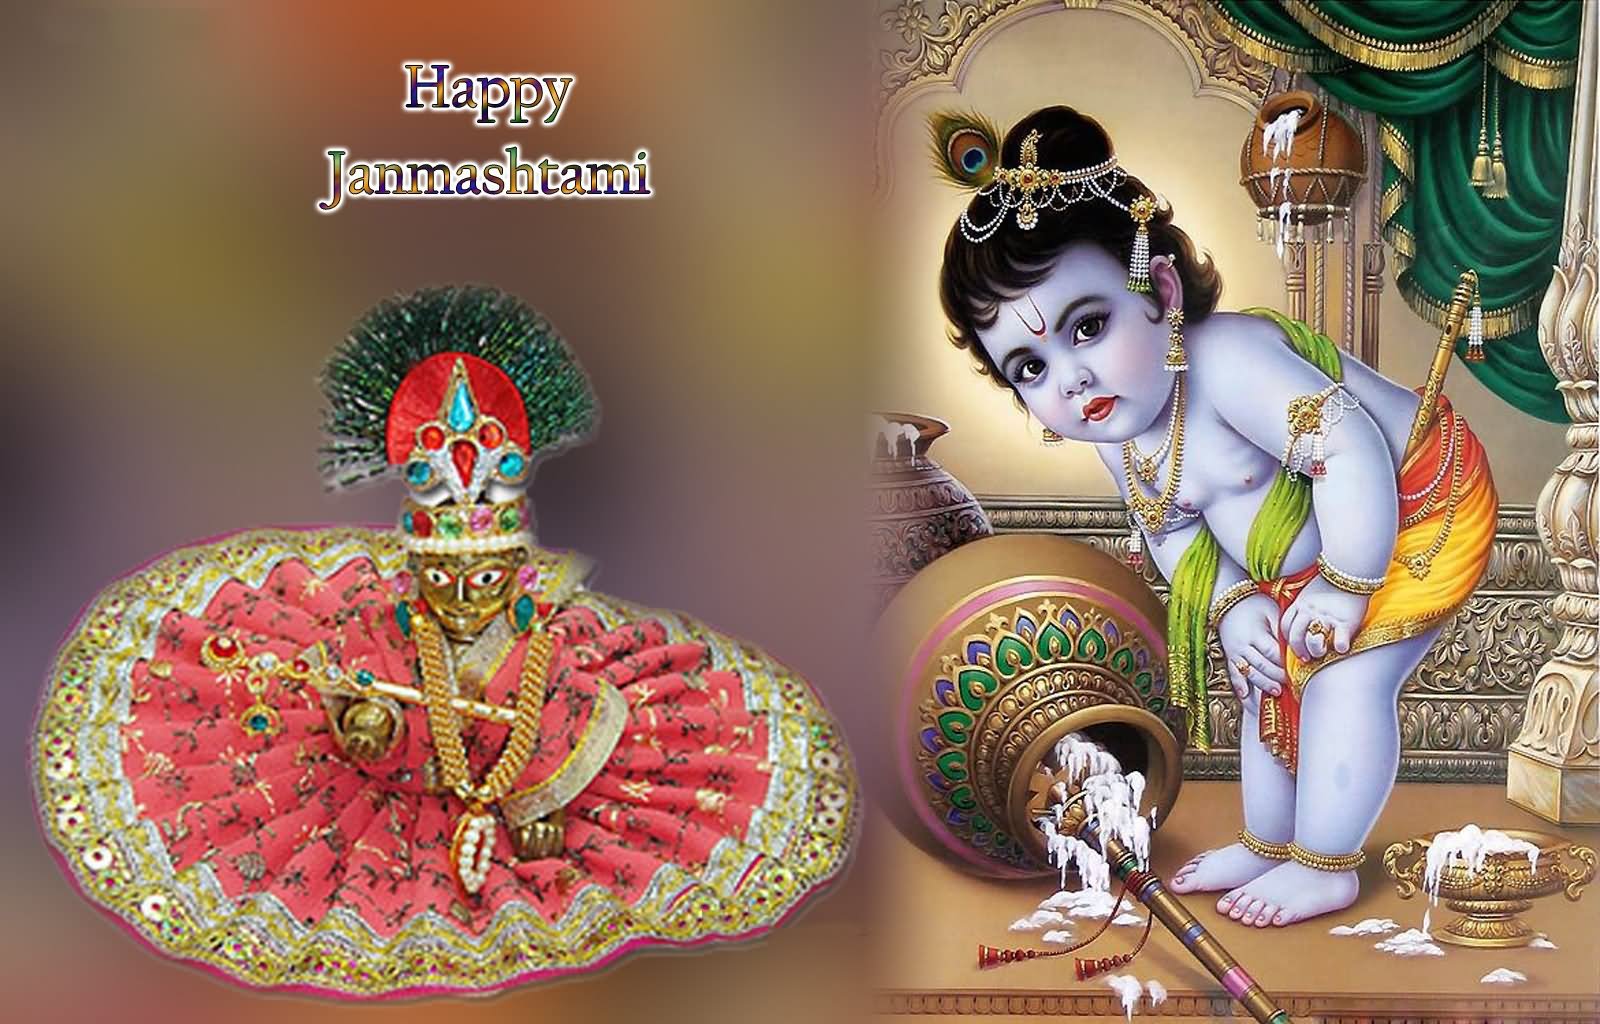 Happy Janmashtami Wishes To You And Your Family